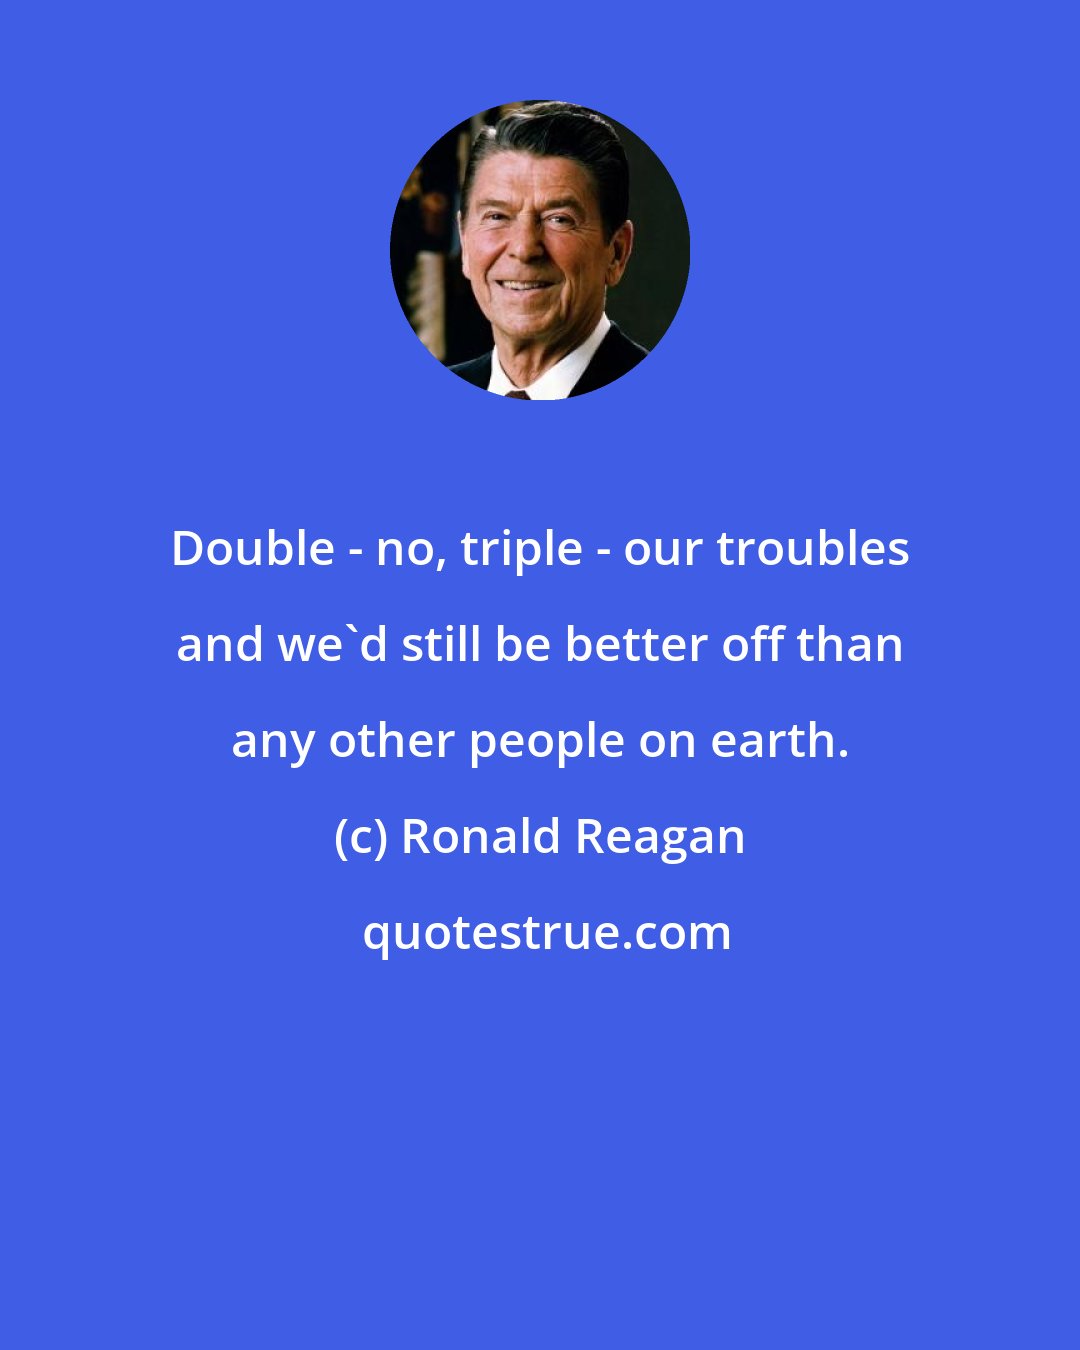 Ronald Reagan: Double - no, triple - our troubles and we'd still be better off than any other people on earth.